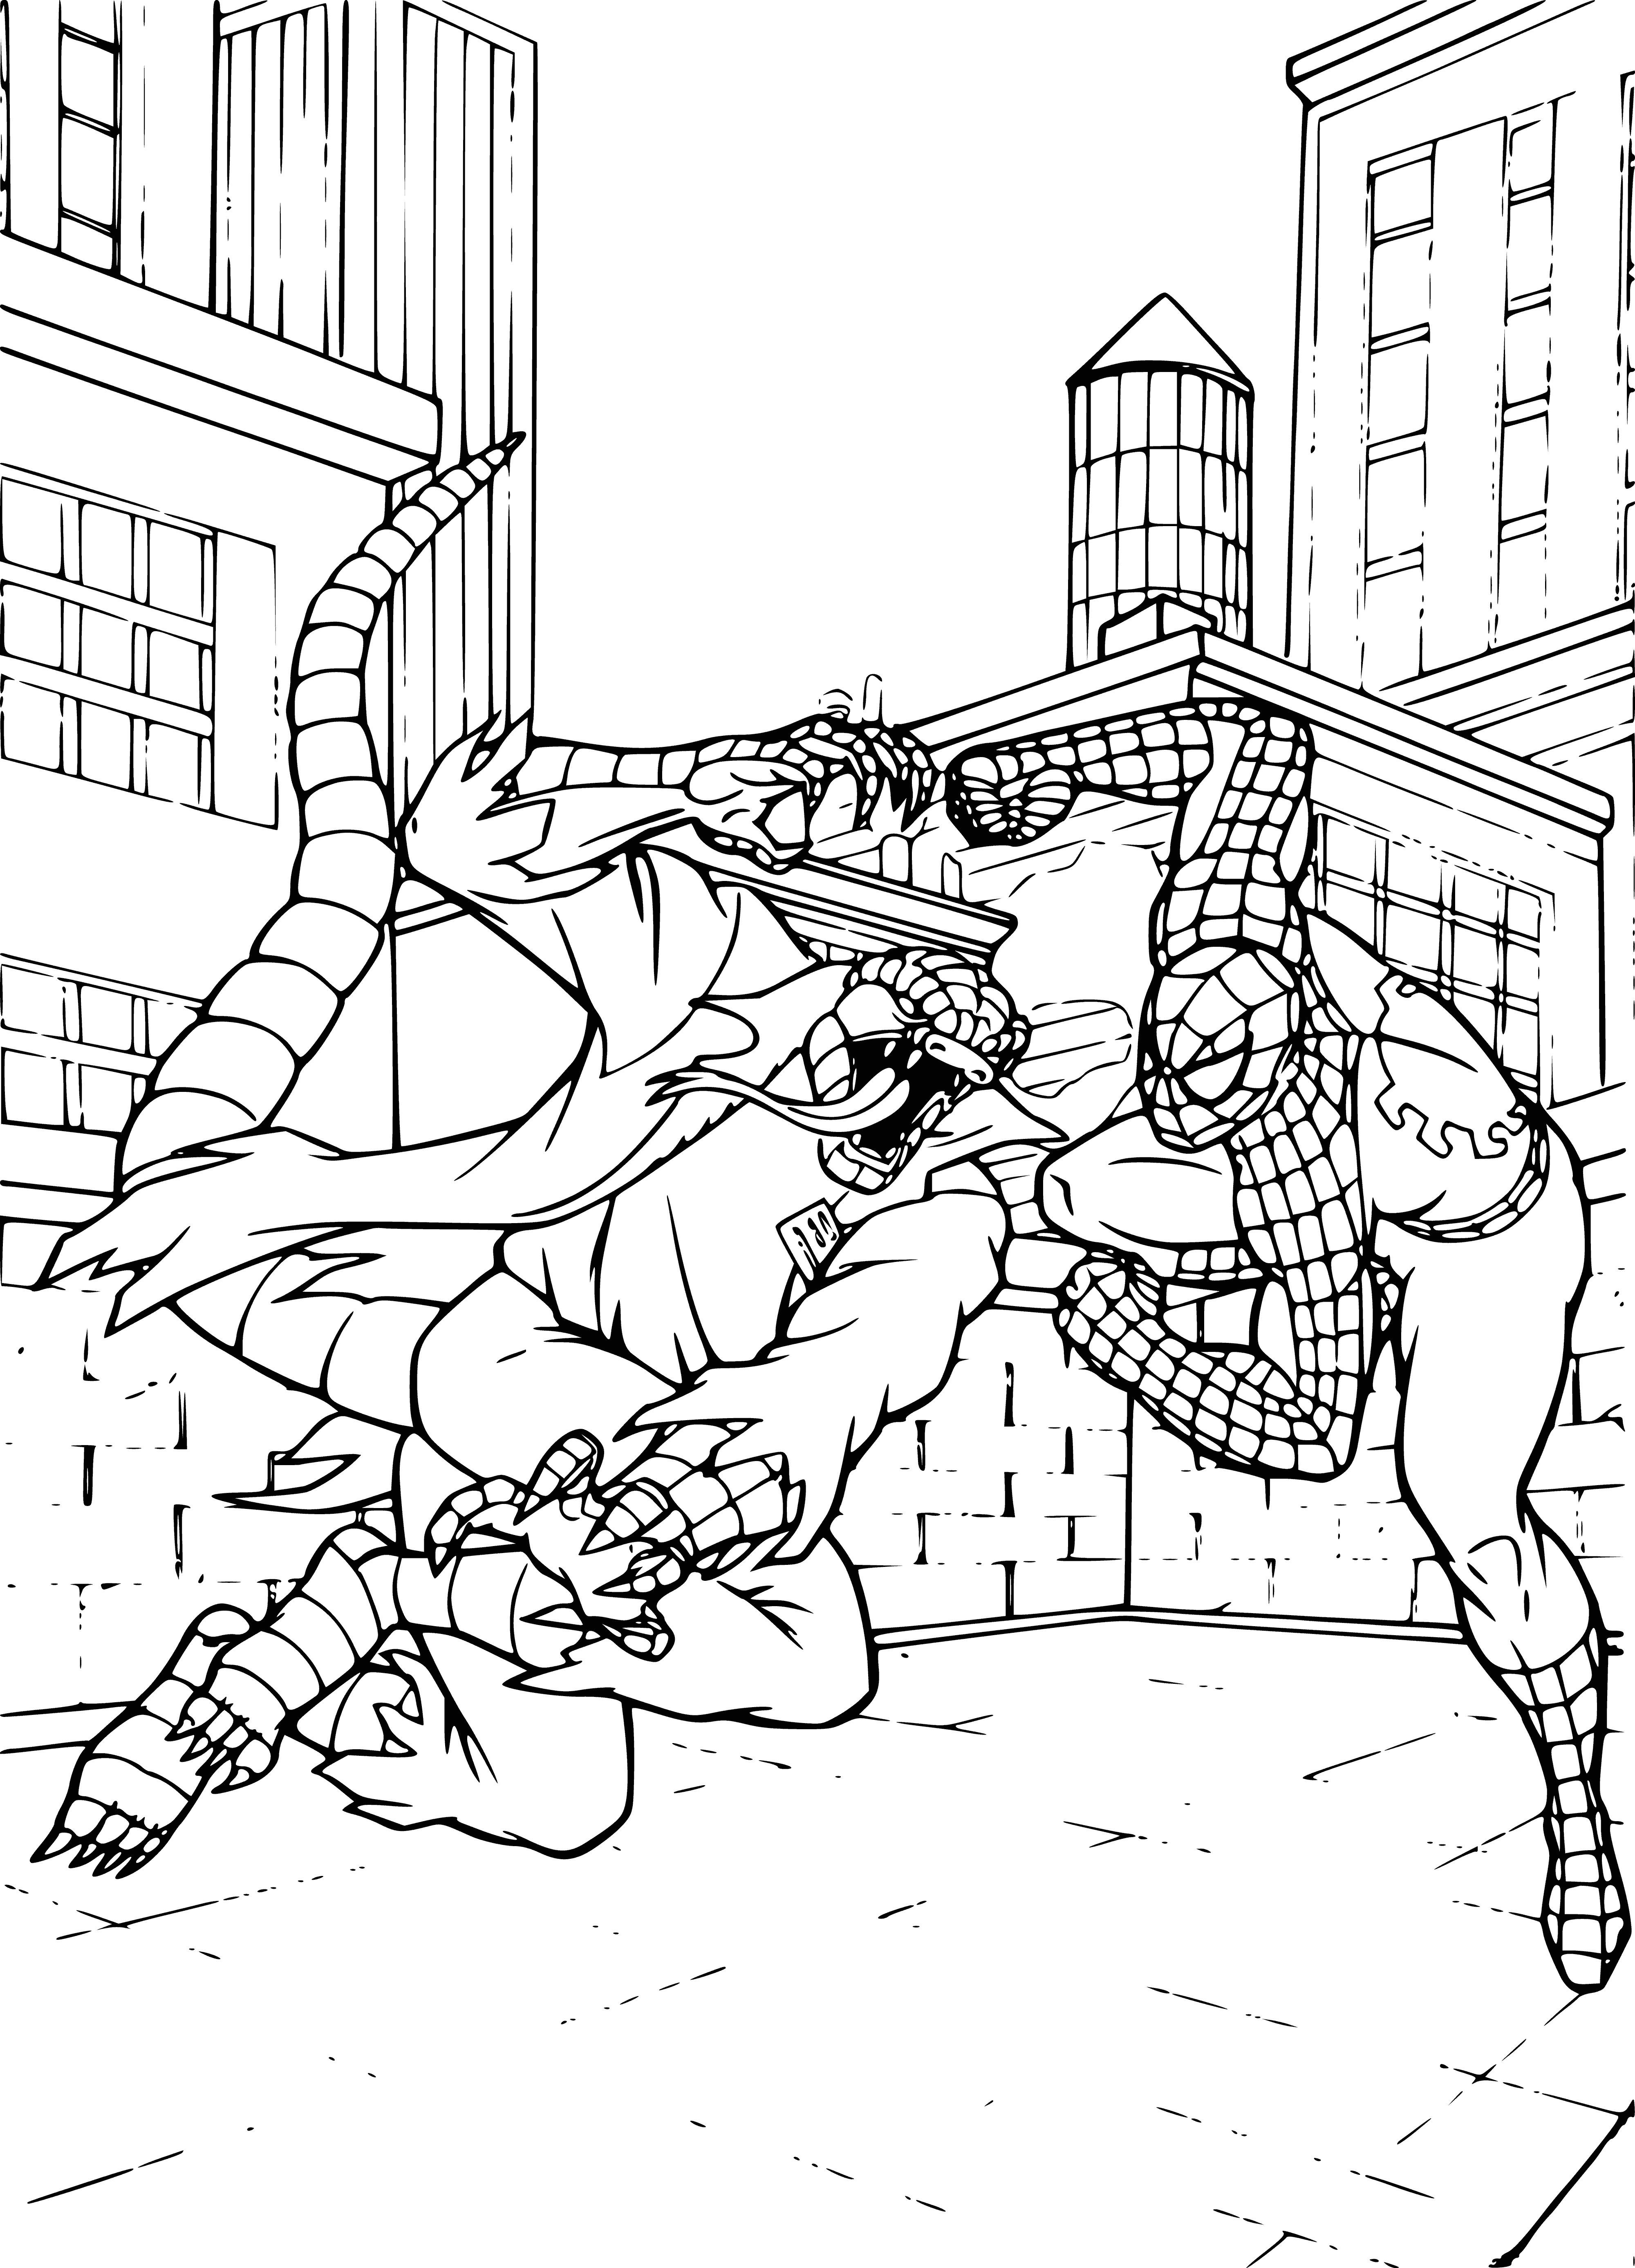 Lizard and Spider-Man coloring page